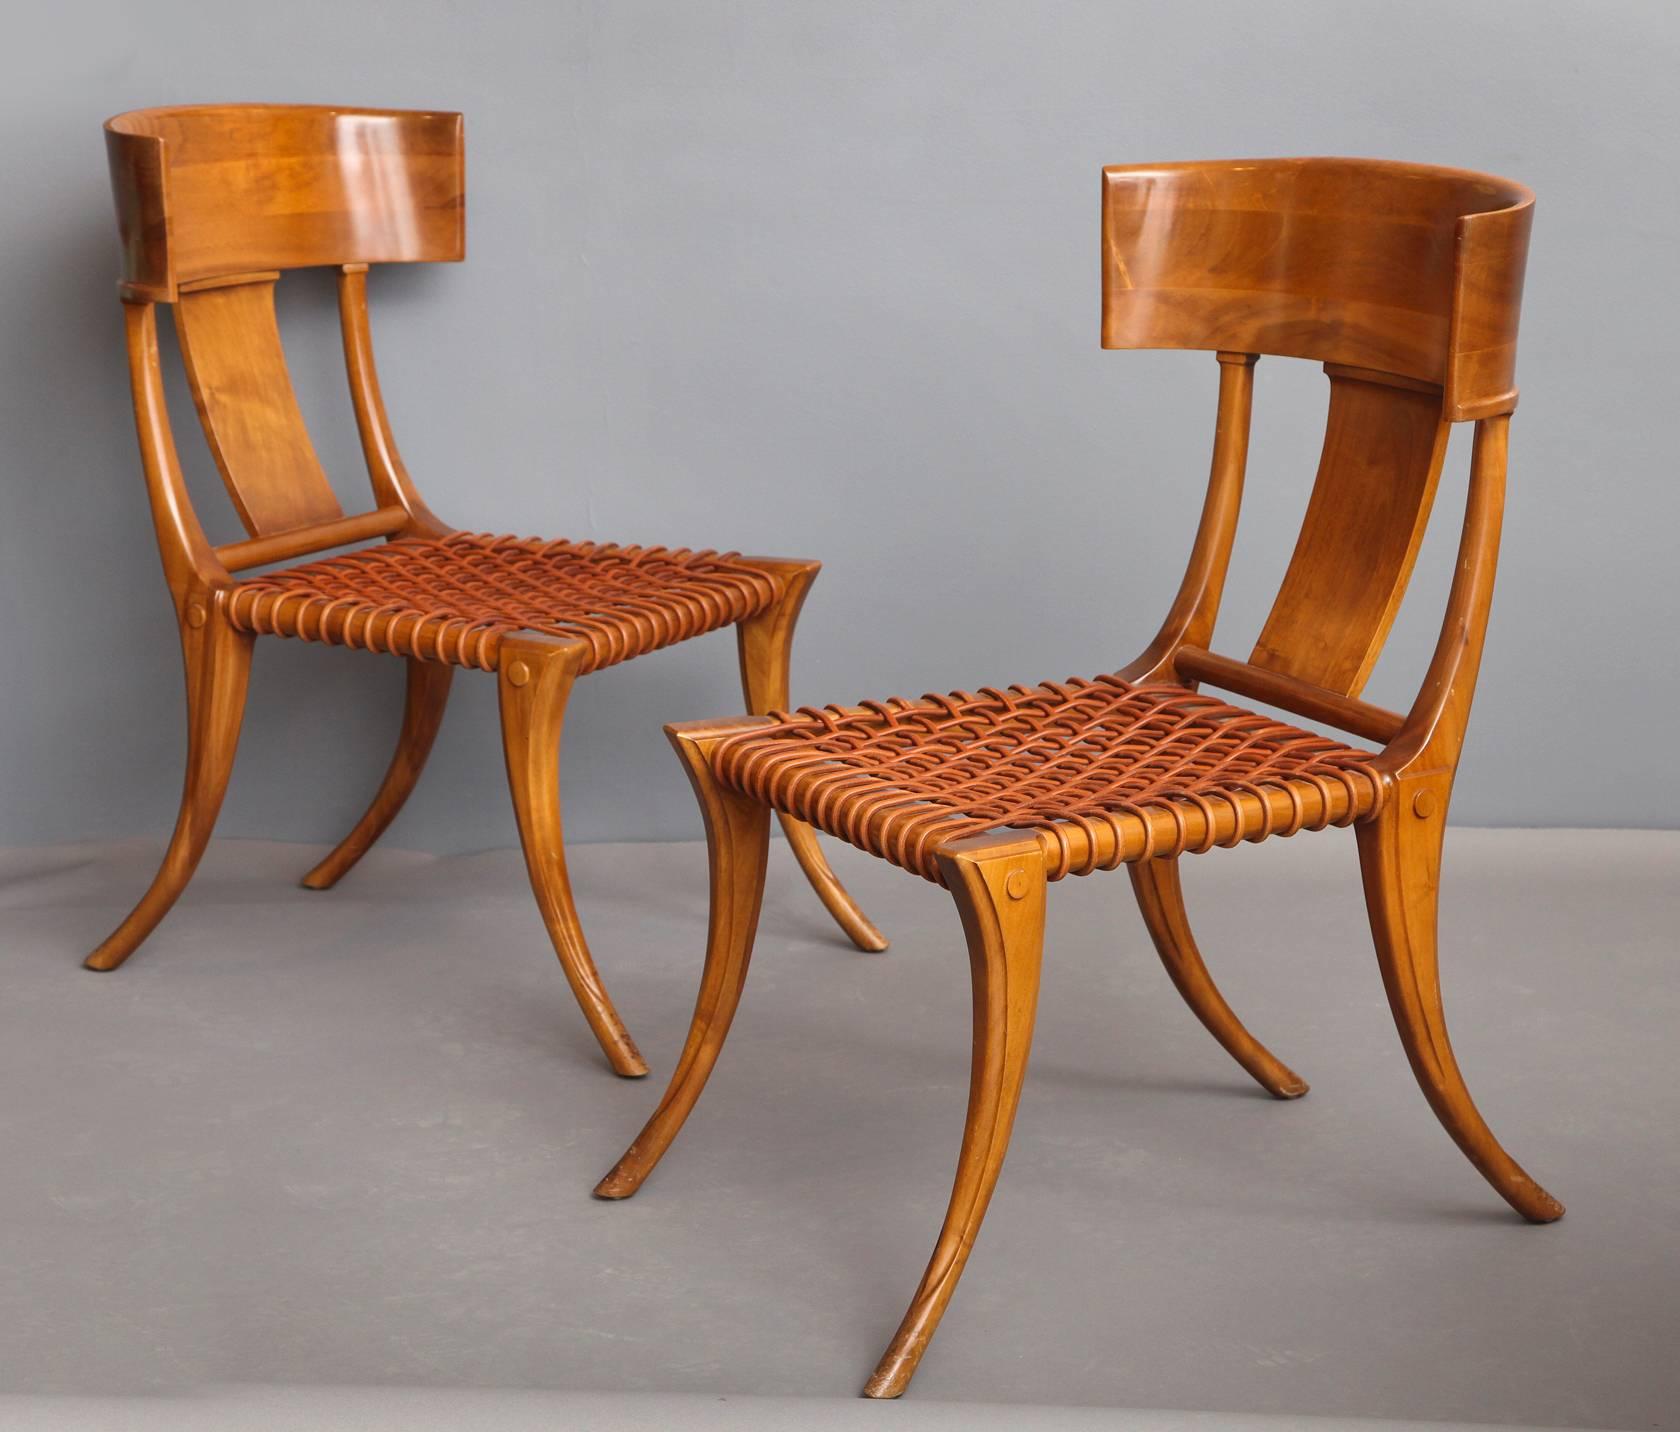 T.H. Robsjohn-Gibbibgs (1905-1976)
Pair of birch side chairs in classical Klismos style with woven leather seats.
Executed by Saridis, Athens
American, circa 1965

This chair model is notably documented on the cover of 